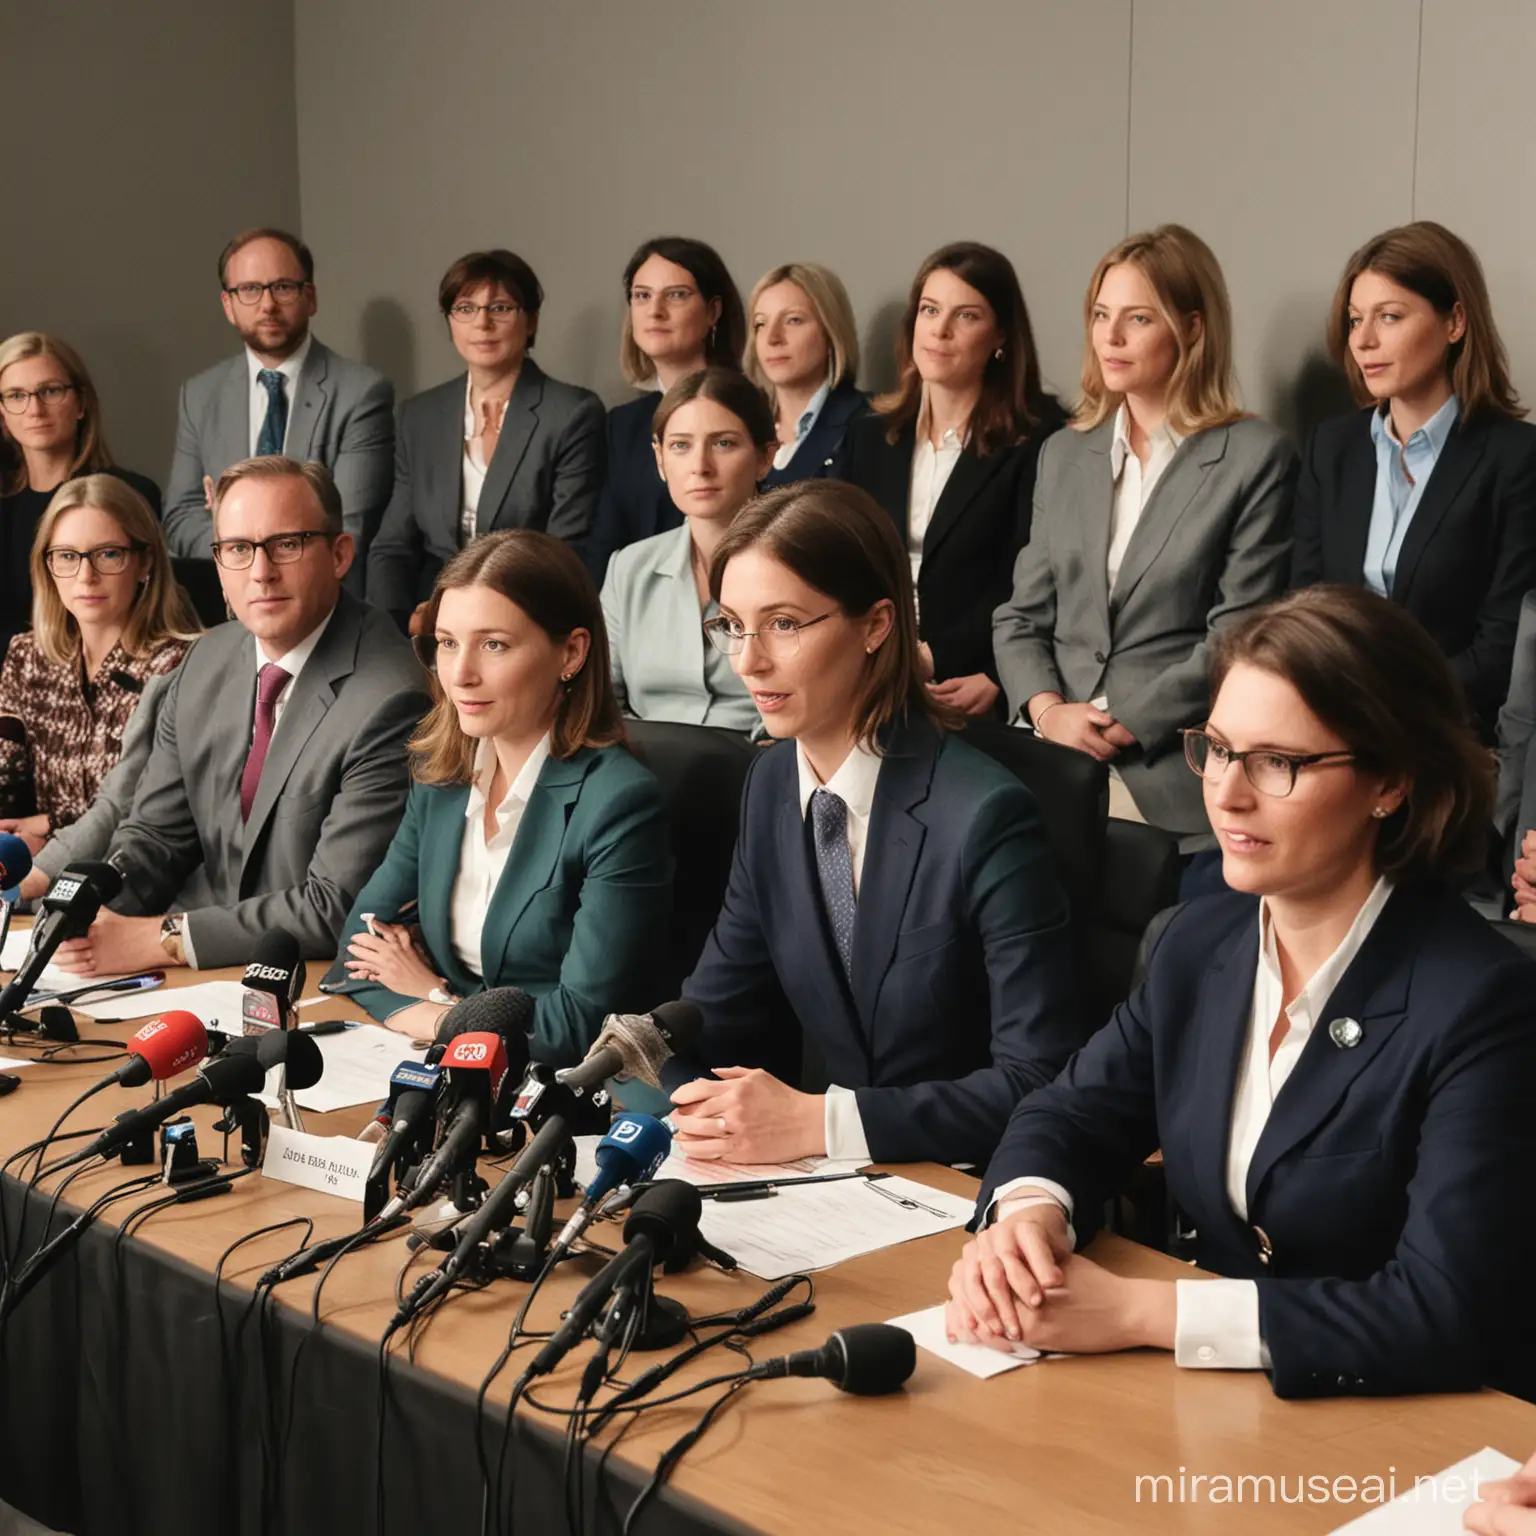 Could you please provide me with a photo illustrating a press conference organized by Lydia Bank, clearly showing company executives seated at a table with microphones in front of them, media representatives filming the executives, and journalists standing, holding microphones extended towards the Lydia executives and asking them questions